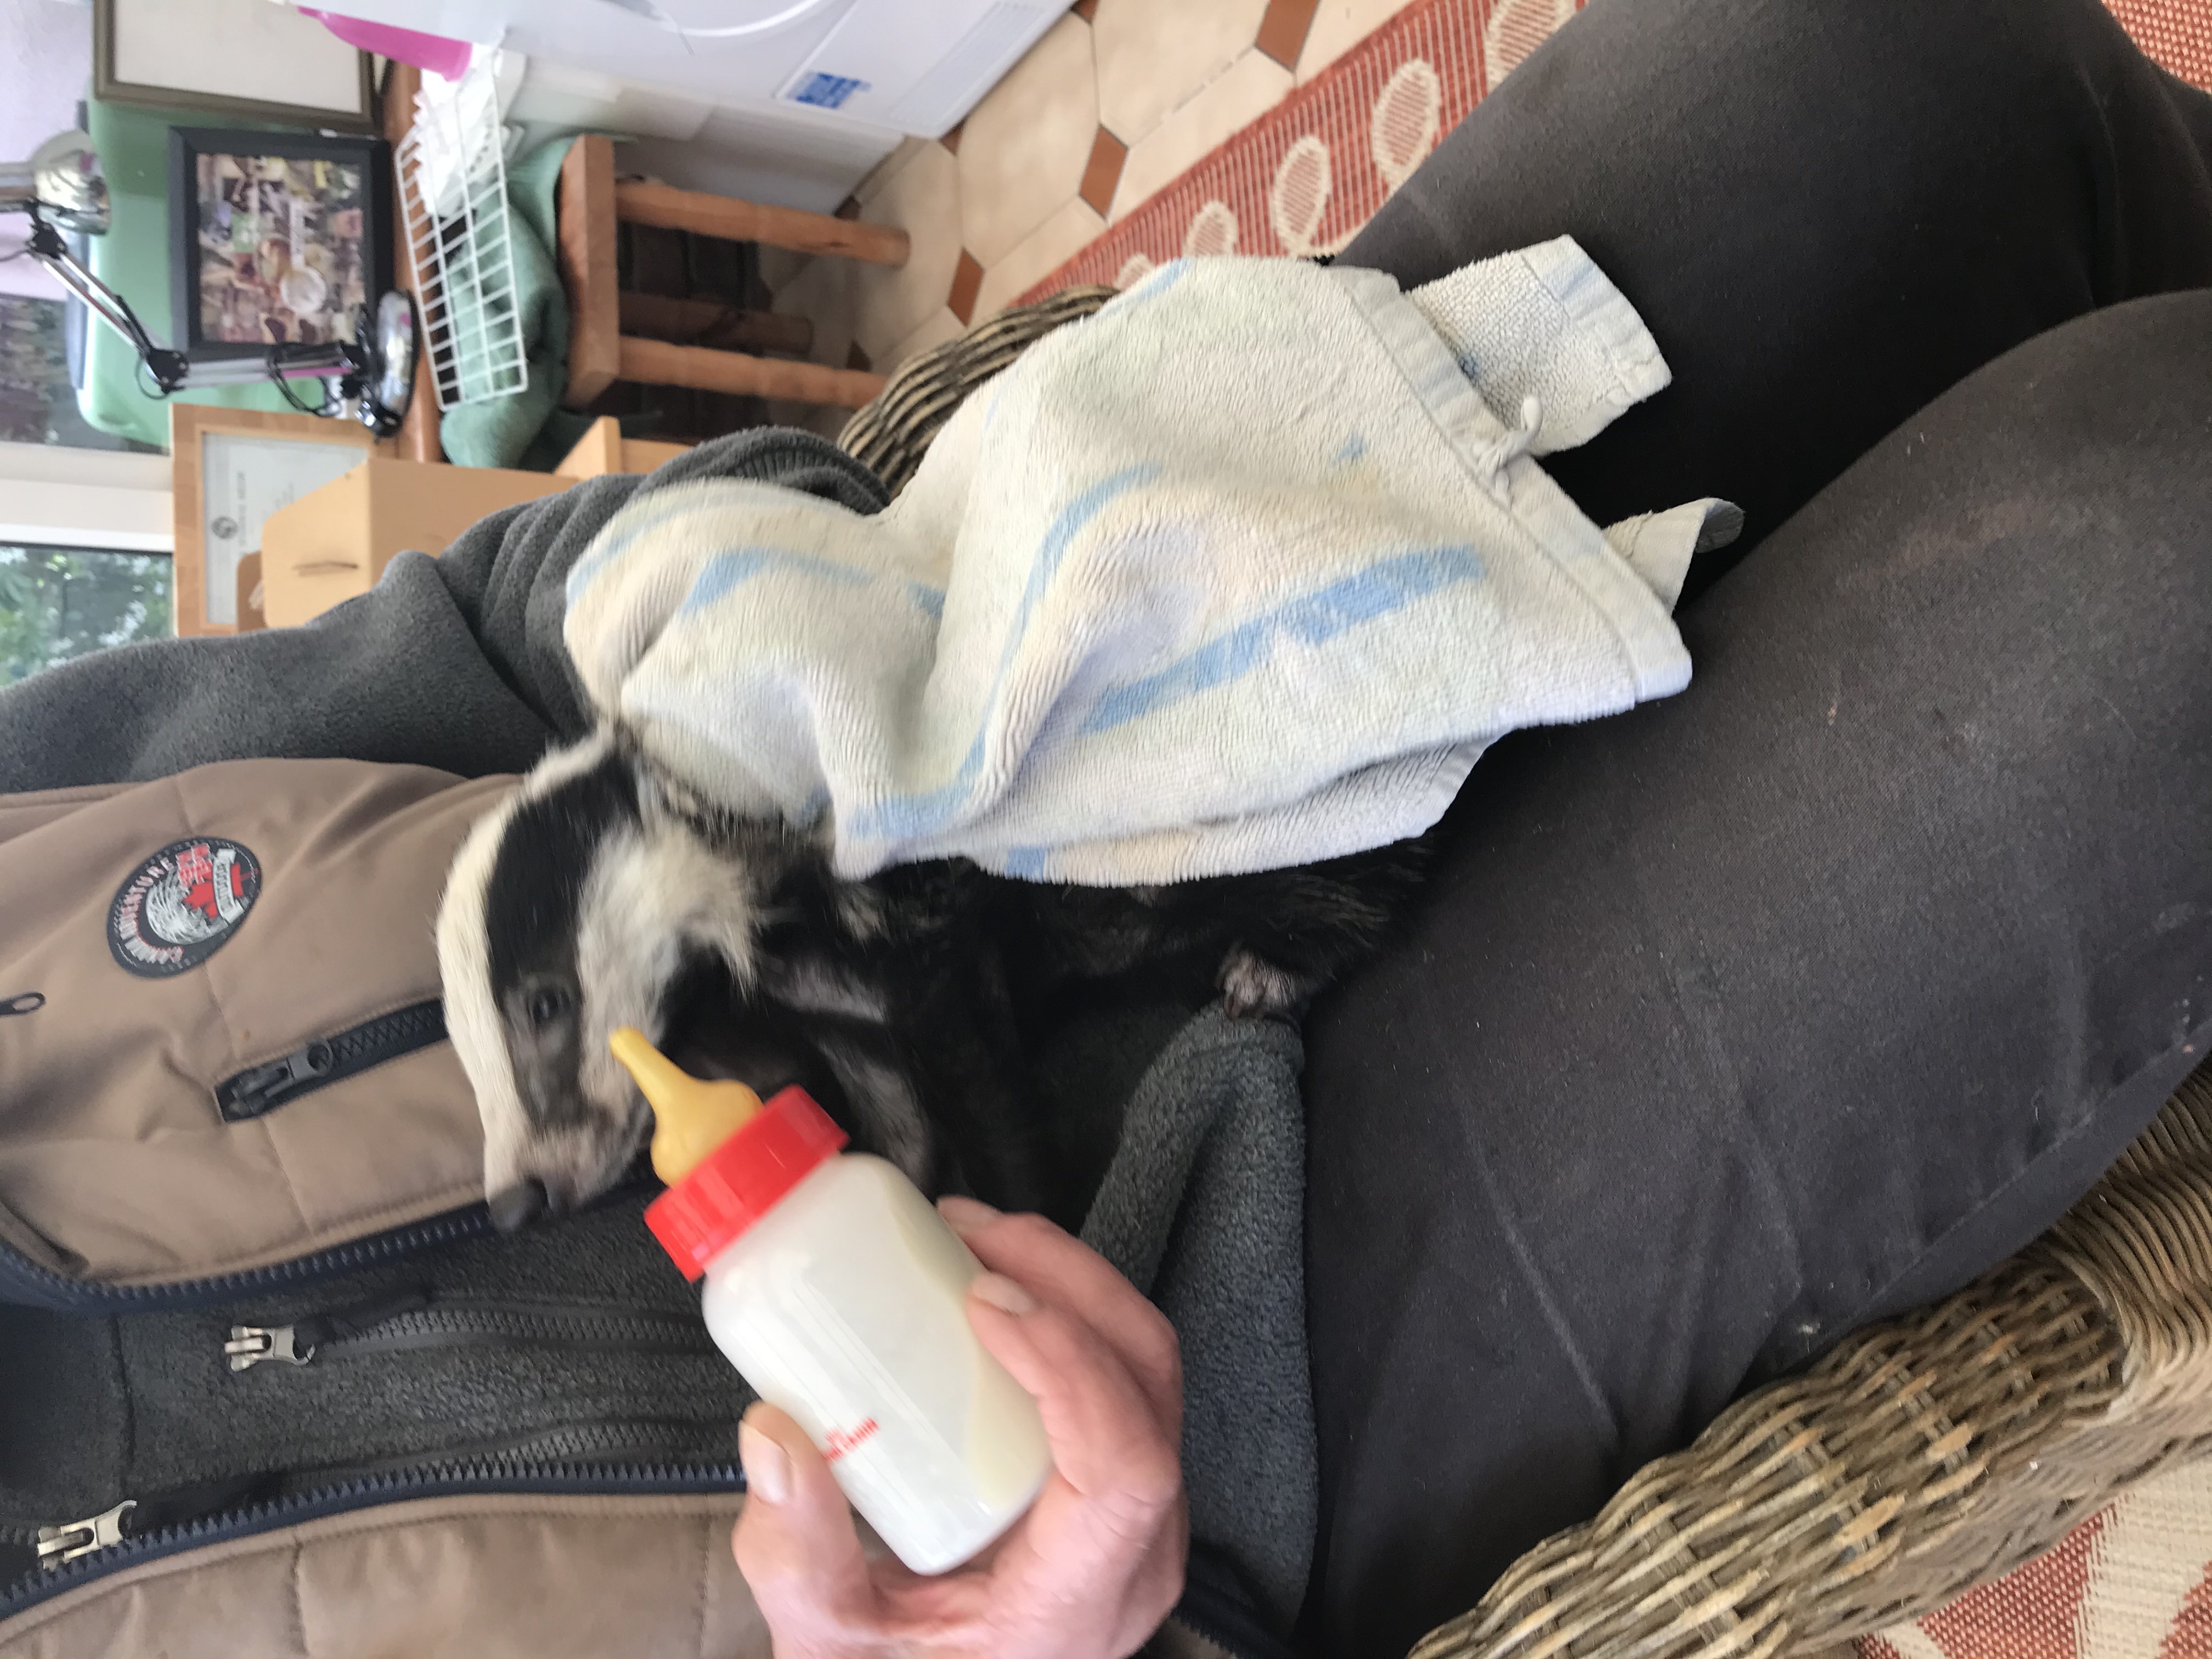 Stormzy the badger cub made a swift recovery after being found in a bad state after bad weather in Suffolk